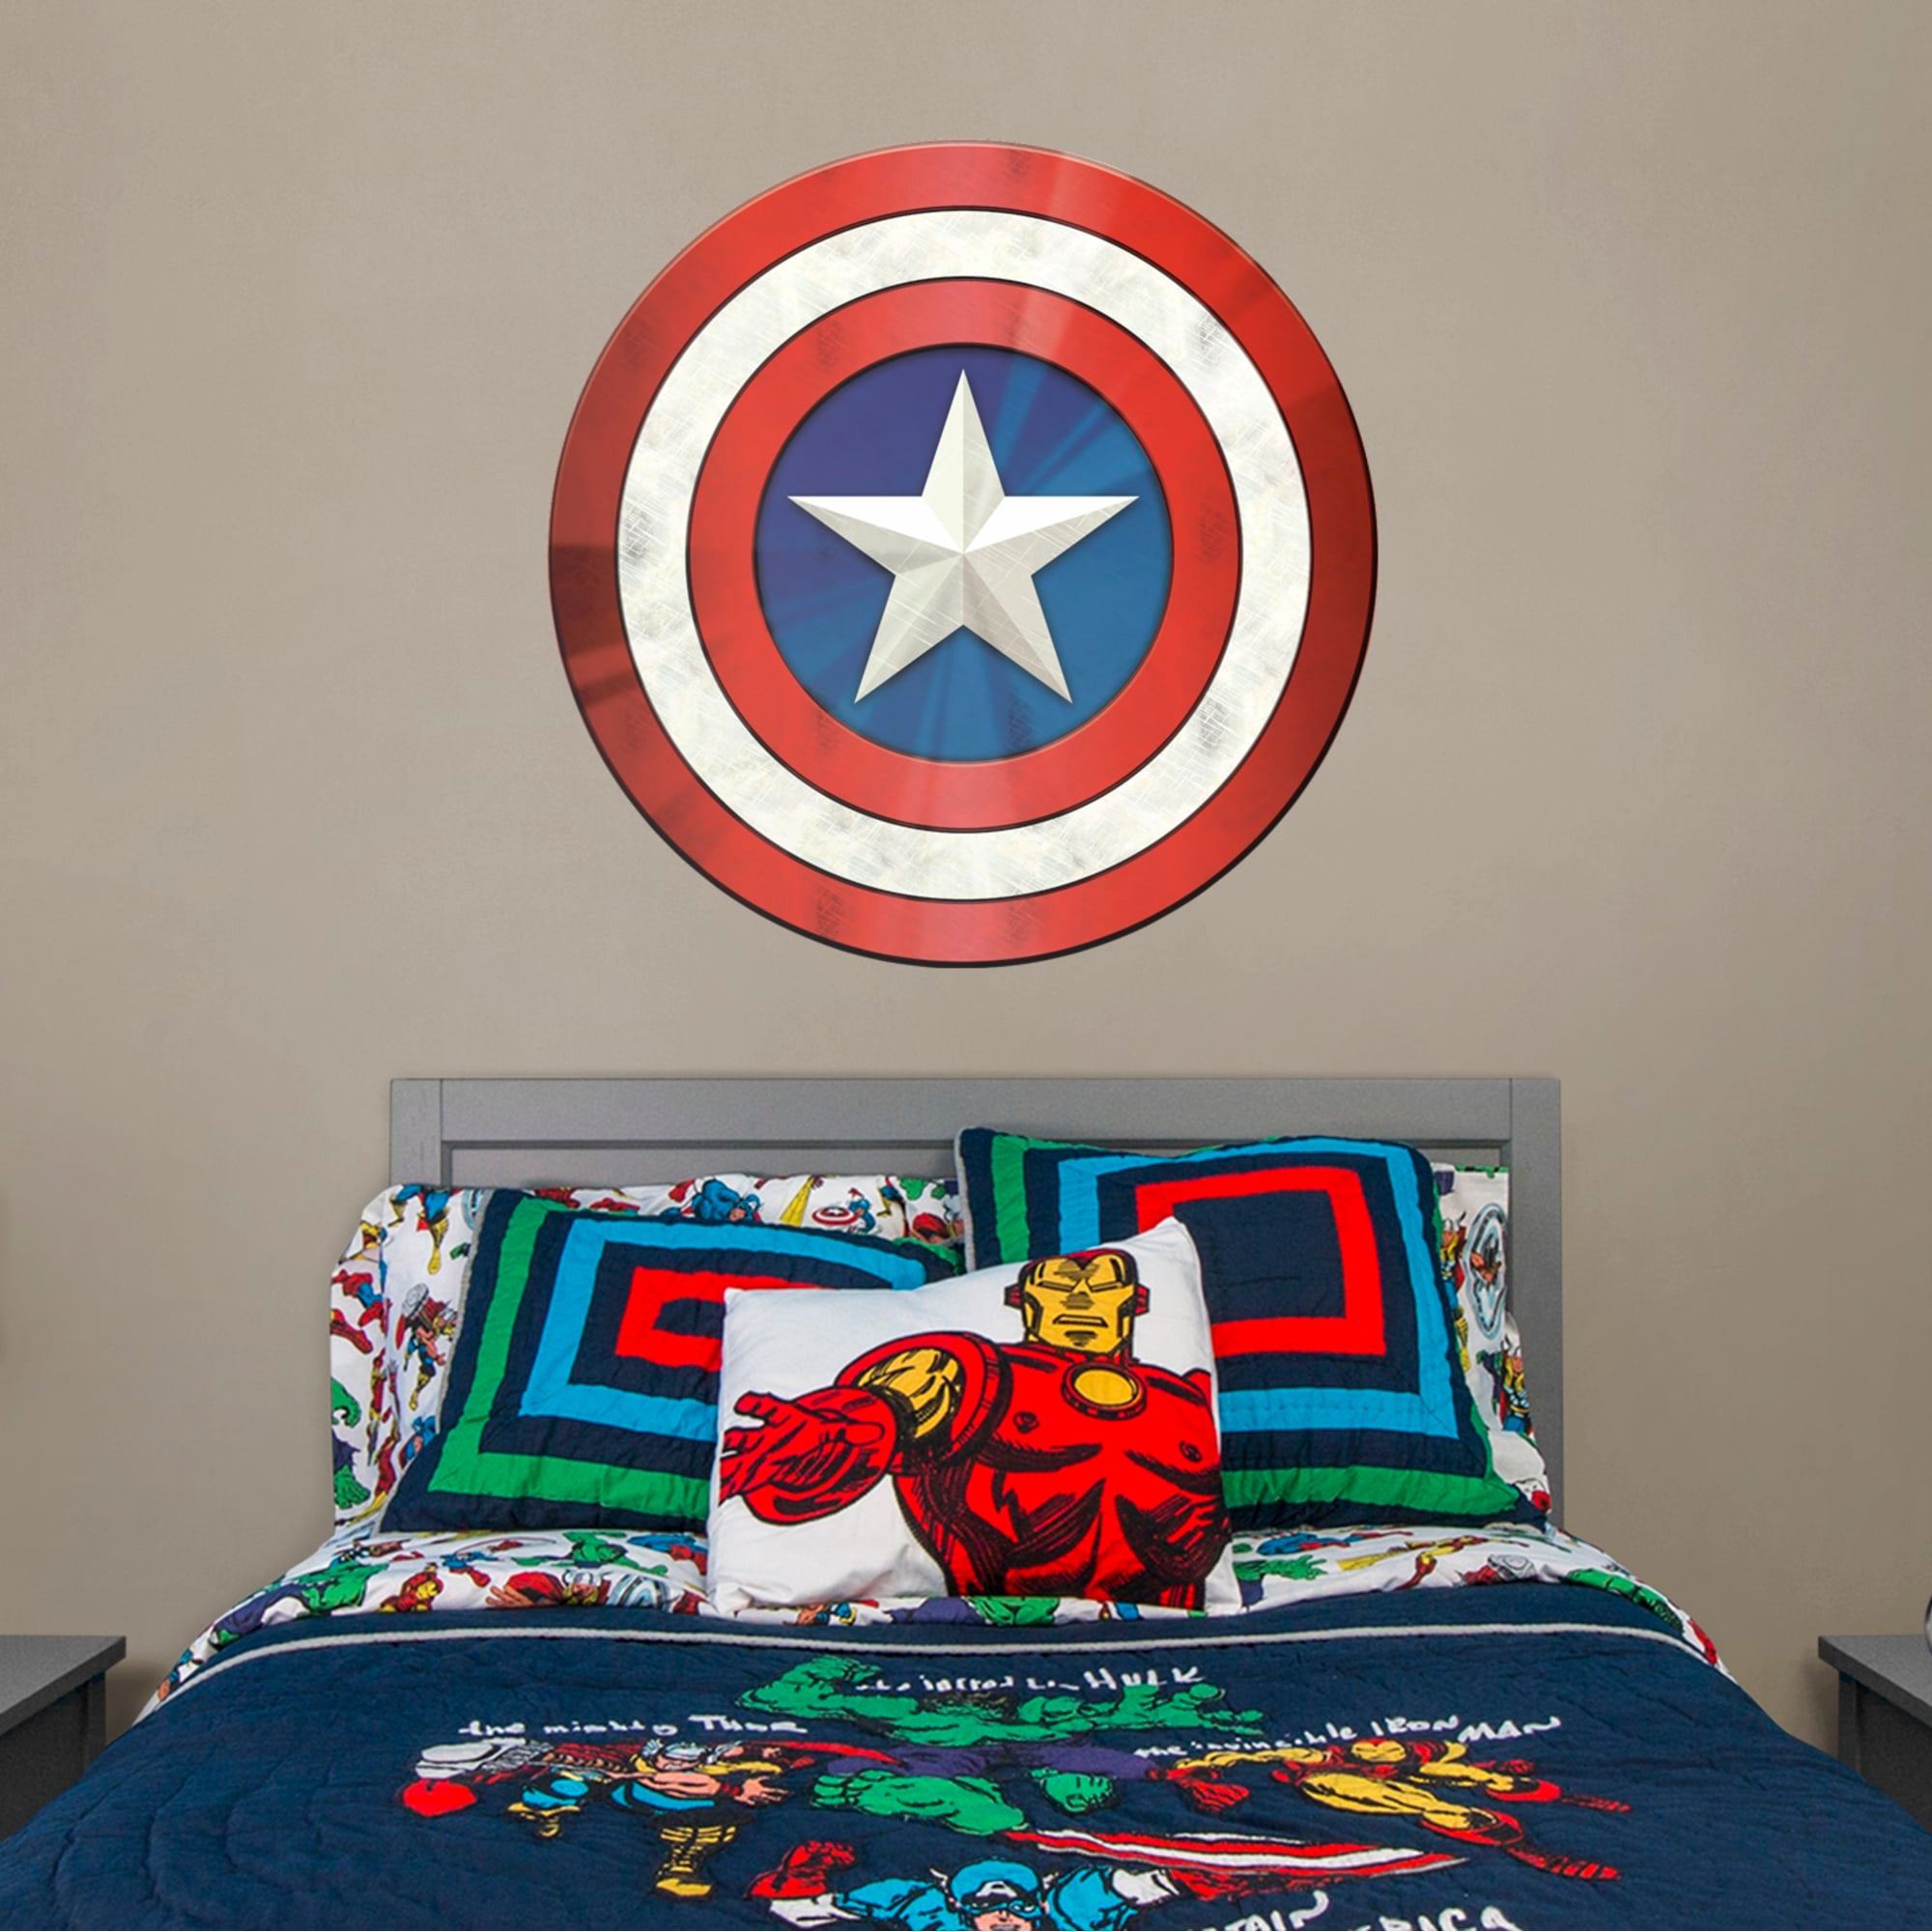 Captain America: Shield - Officially Licensed Removable Wall Decal 39.0"W x 39.0"H by Fathead | Vinyl